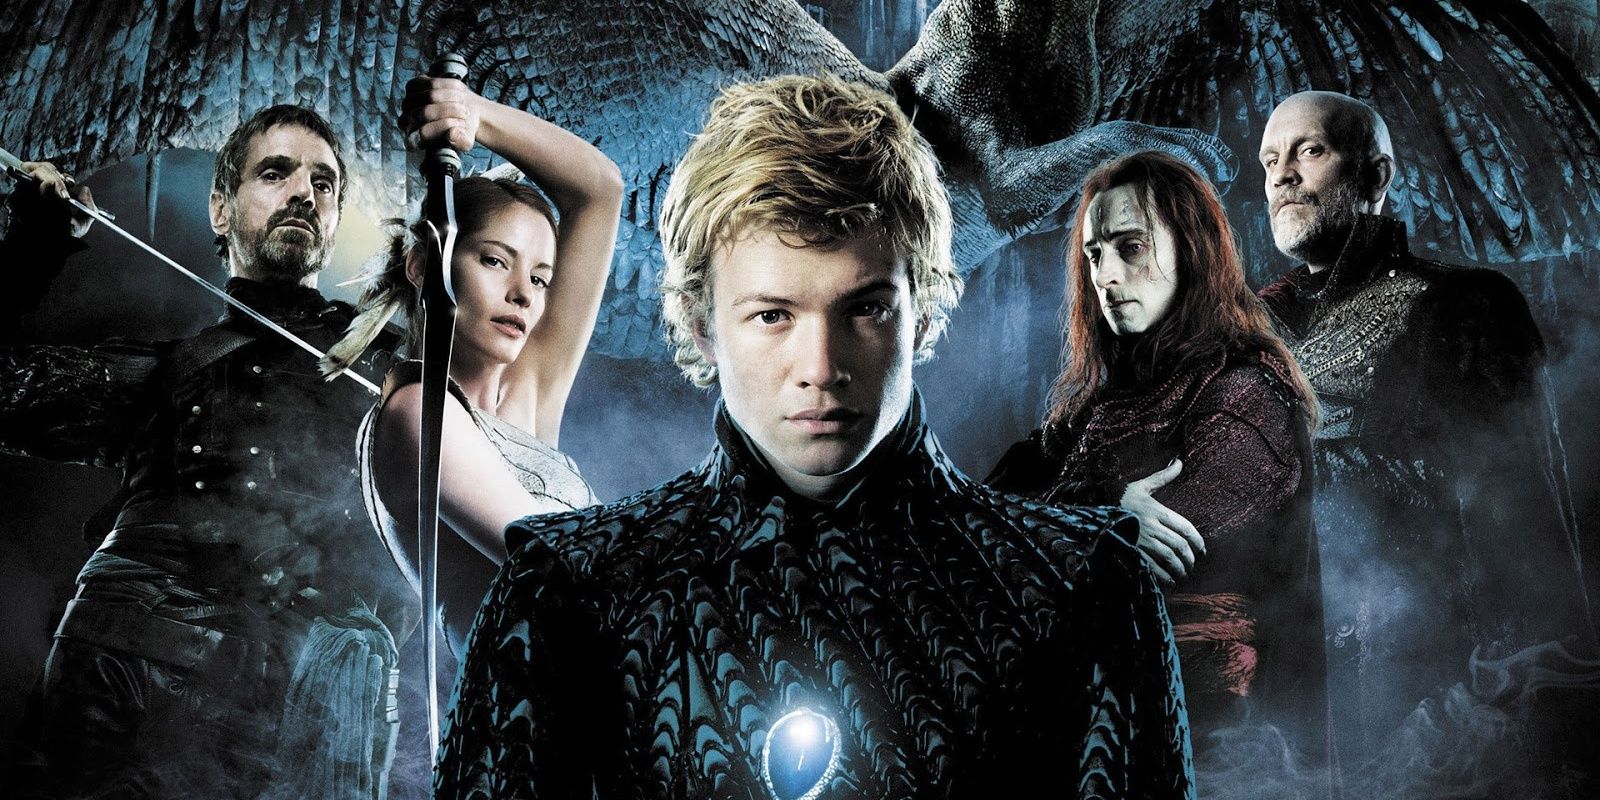 15 Films To Watch If You Like The Lord Of The Rings (Other Than The Hobbit)